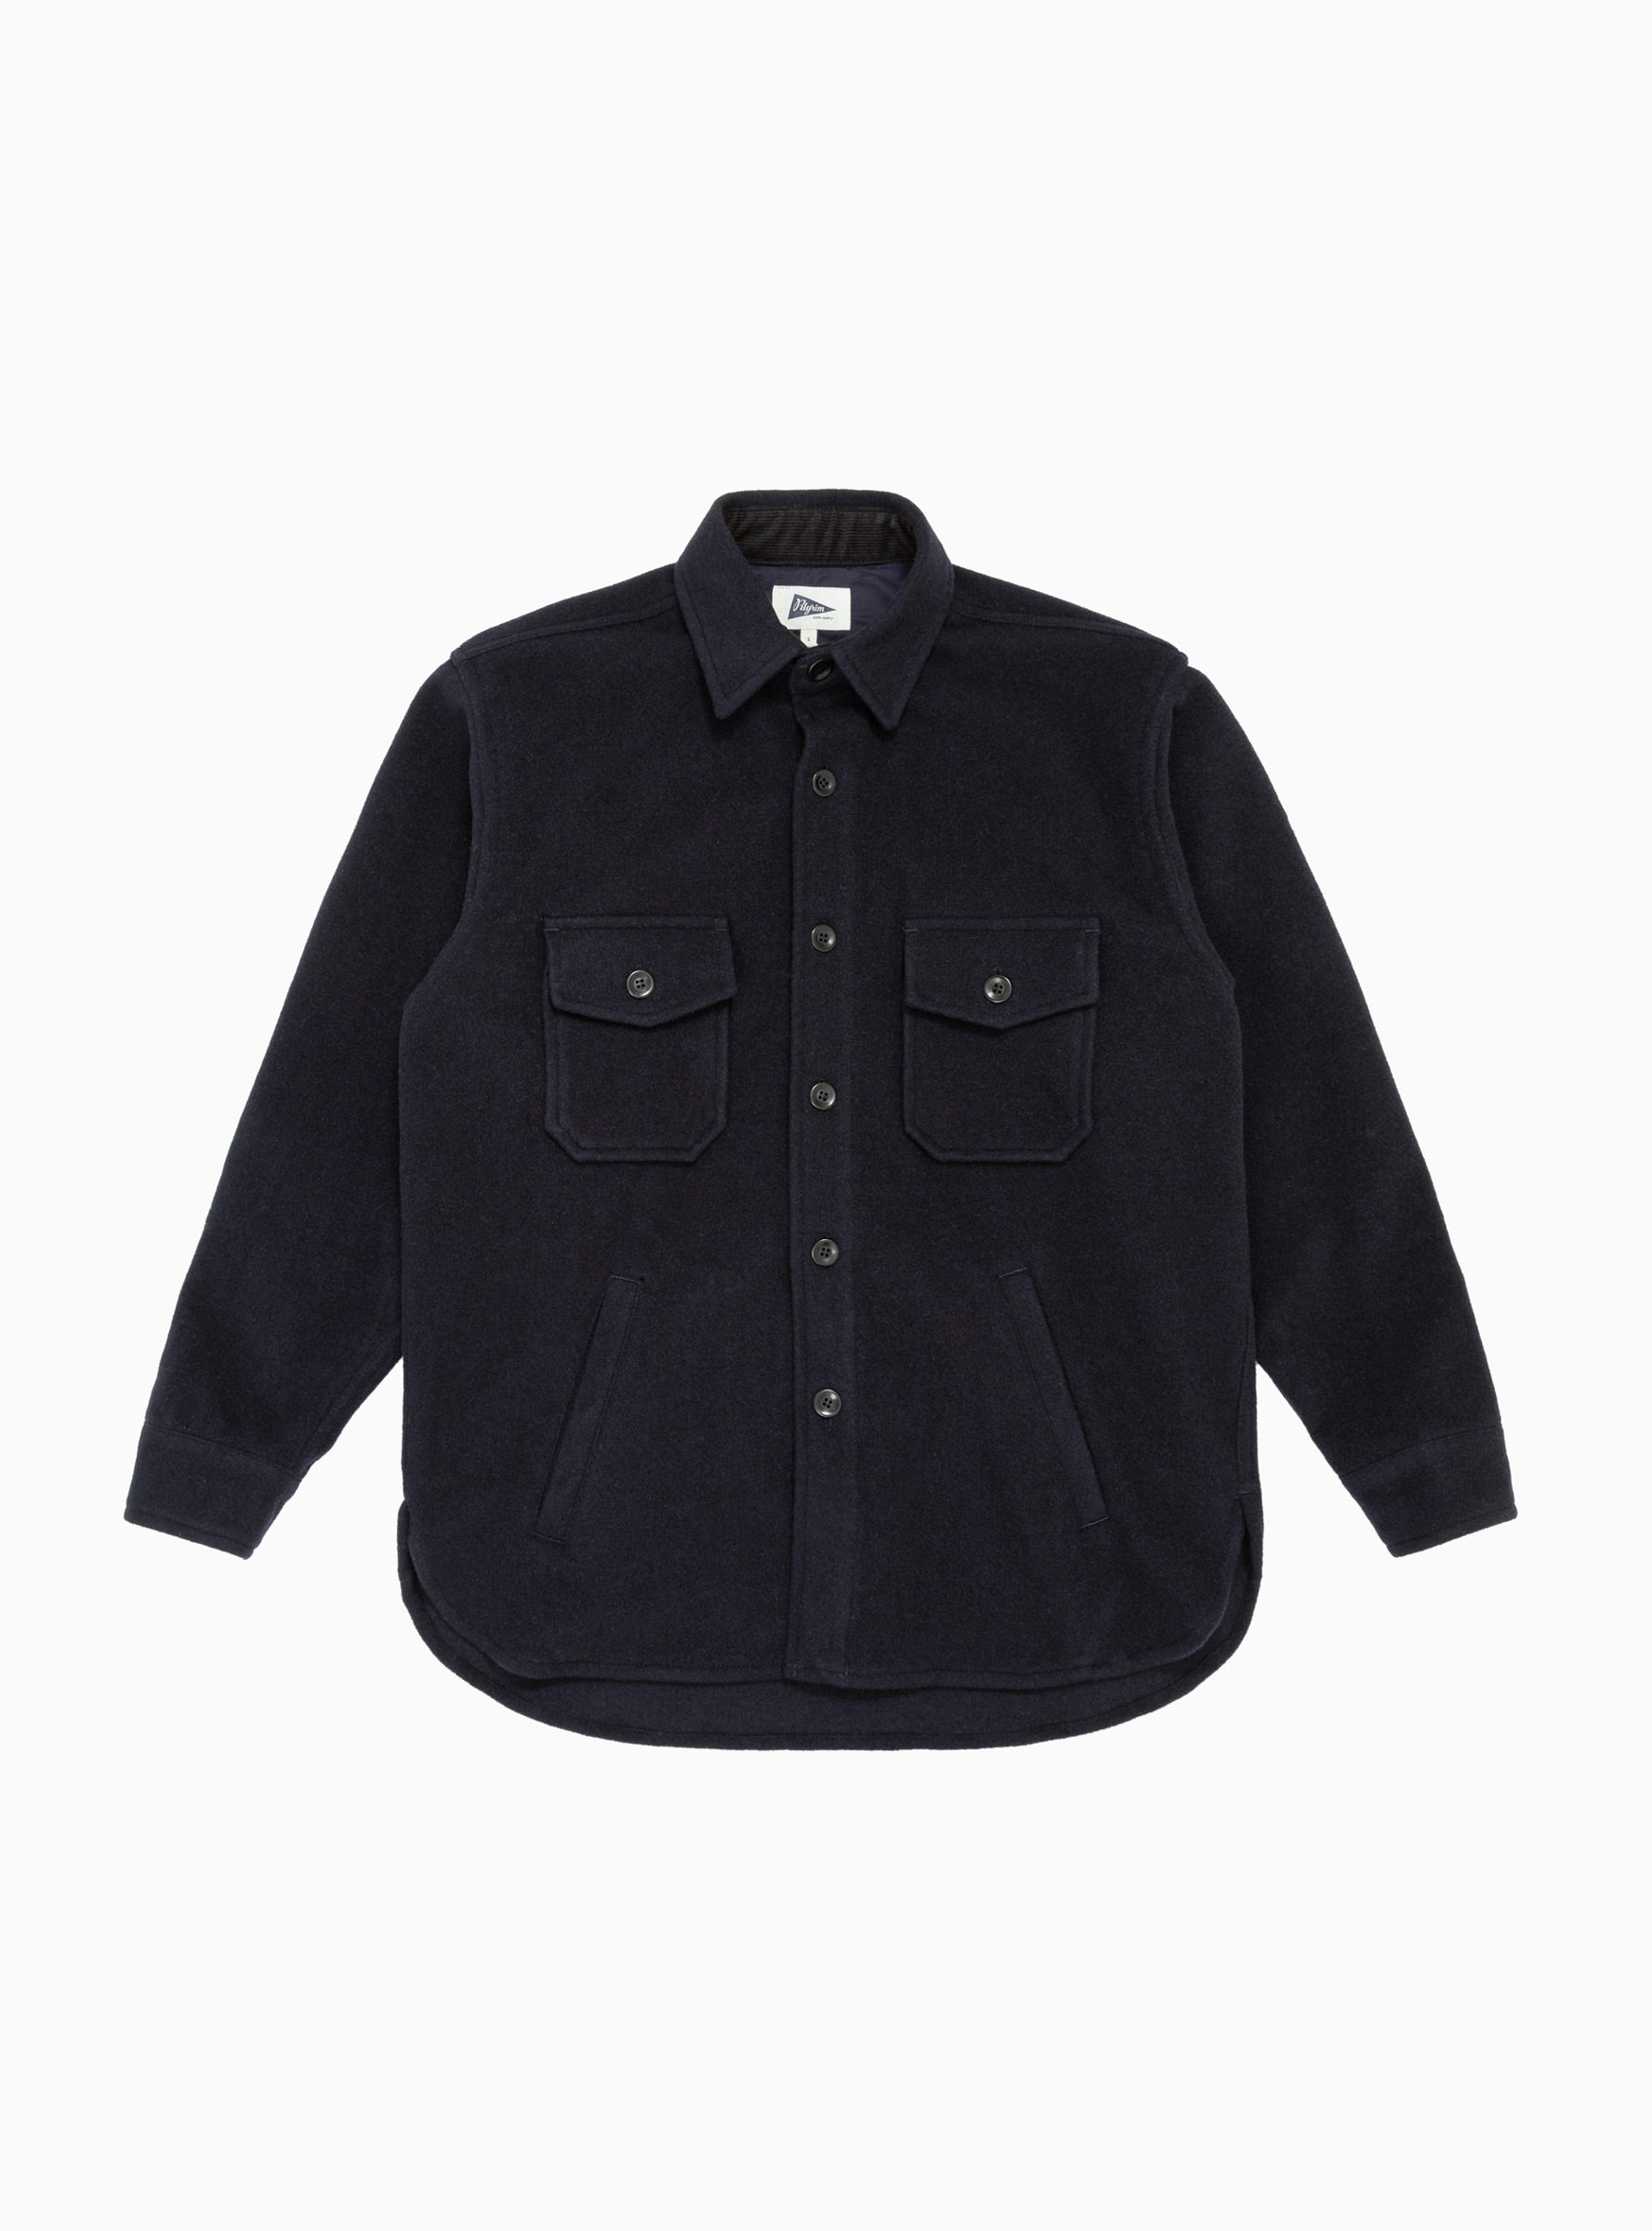 Weiss Melton Guide Jacket Navy by Pilgrim Surf + Supply